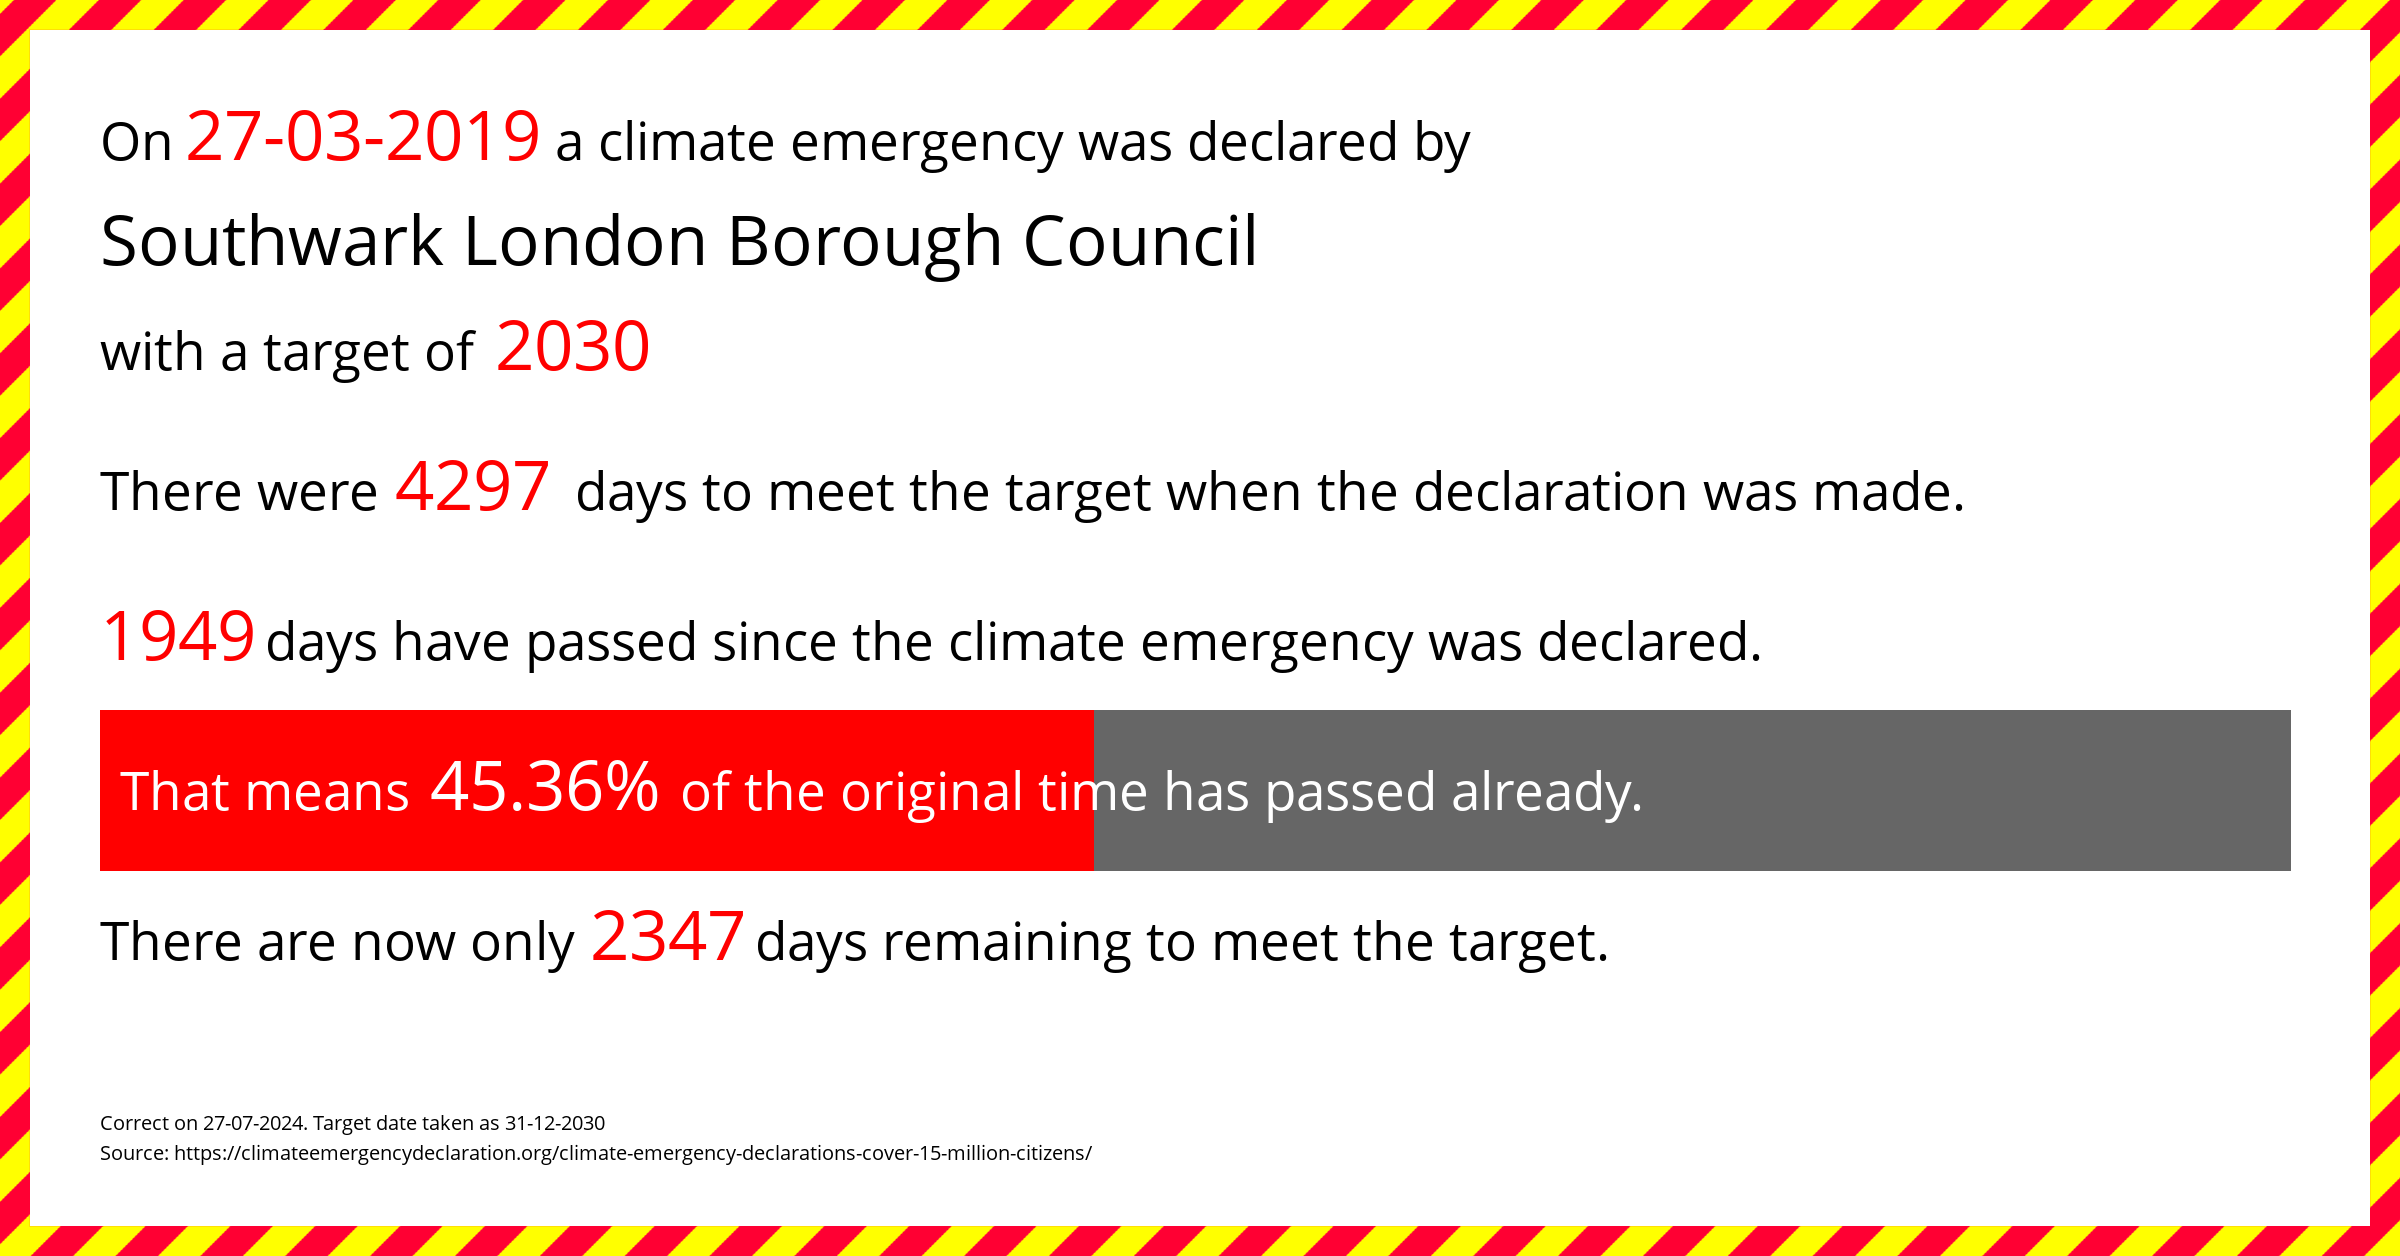 Southwark London Borough Council declared a Climate emergency on Wednesday 27th March 2019, with a target of 2030.